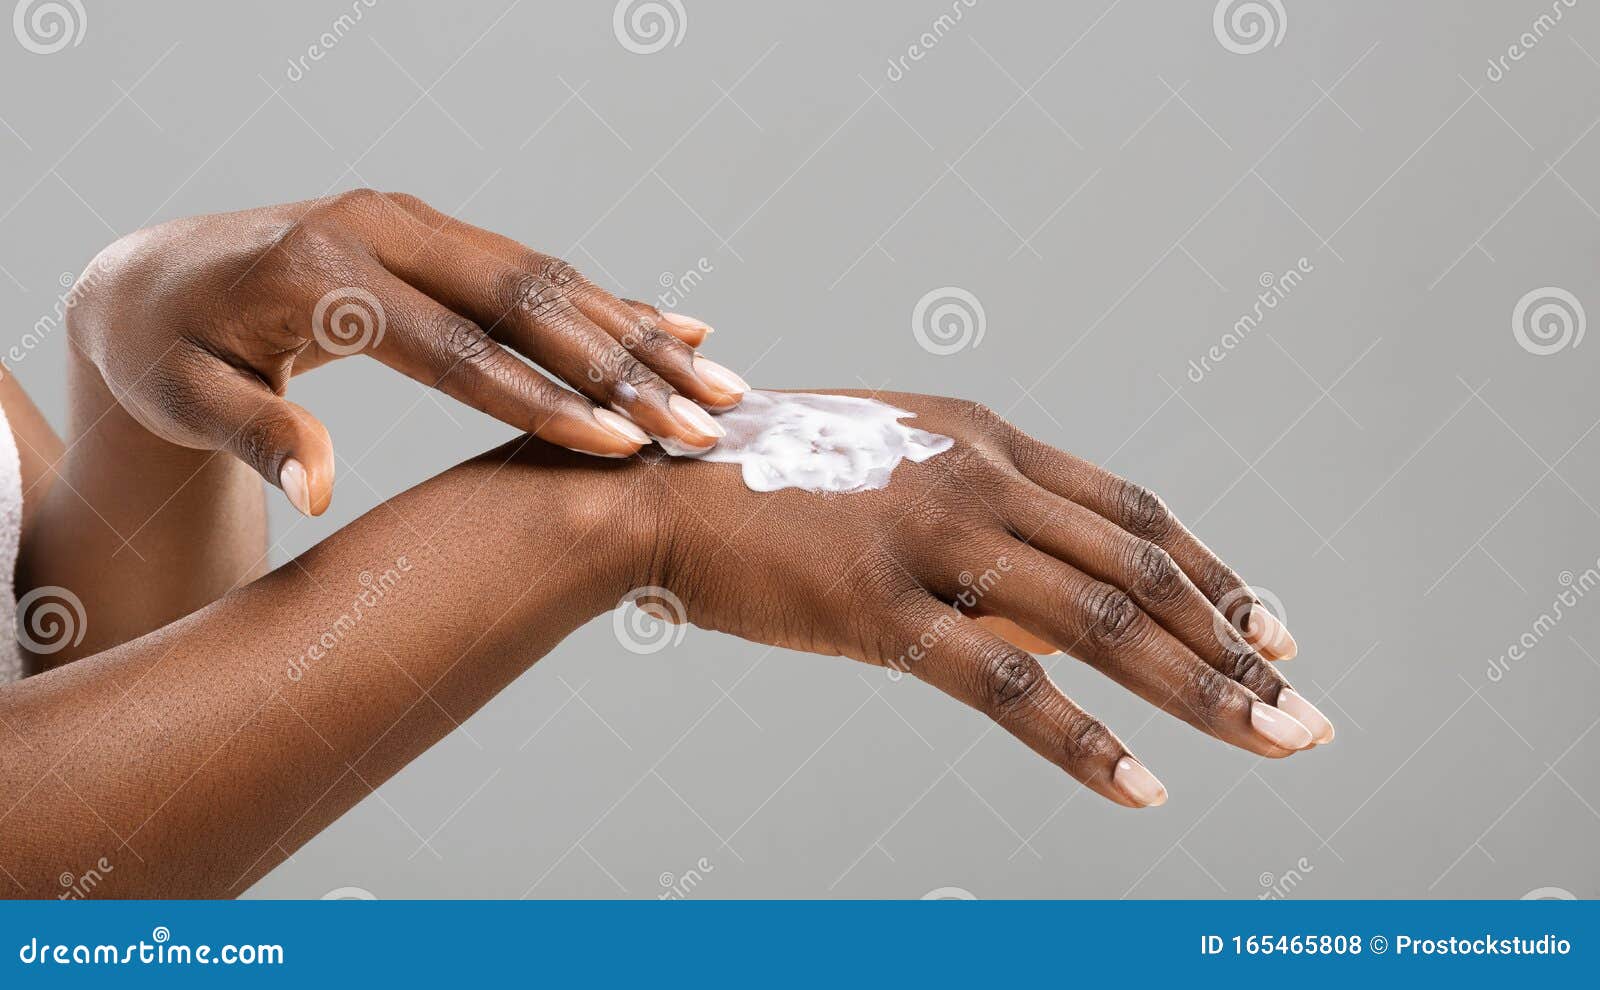 black woman applying body lotion to her hands